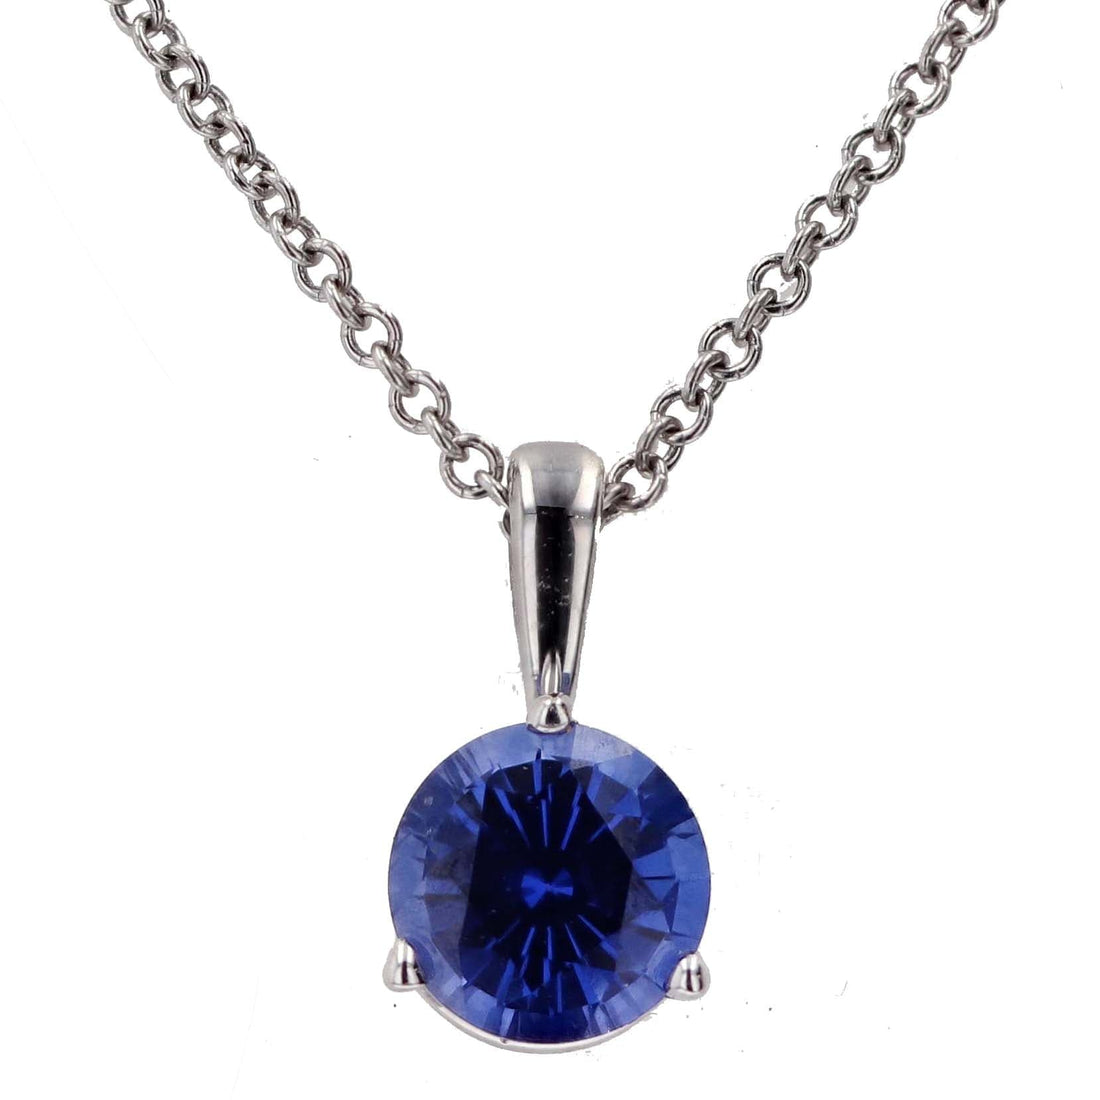 White Gold Prong Set Sapphire Pendant Necklace - Skeie's Jewelers